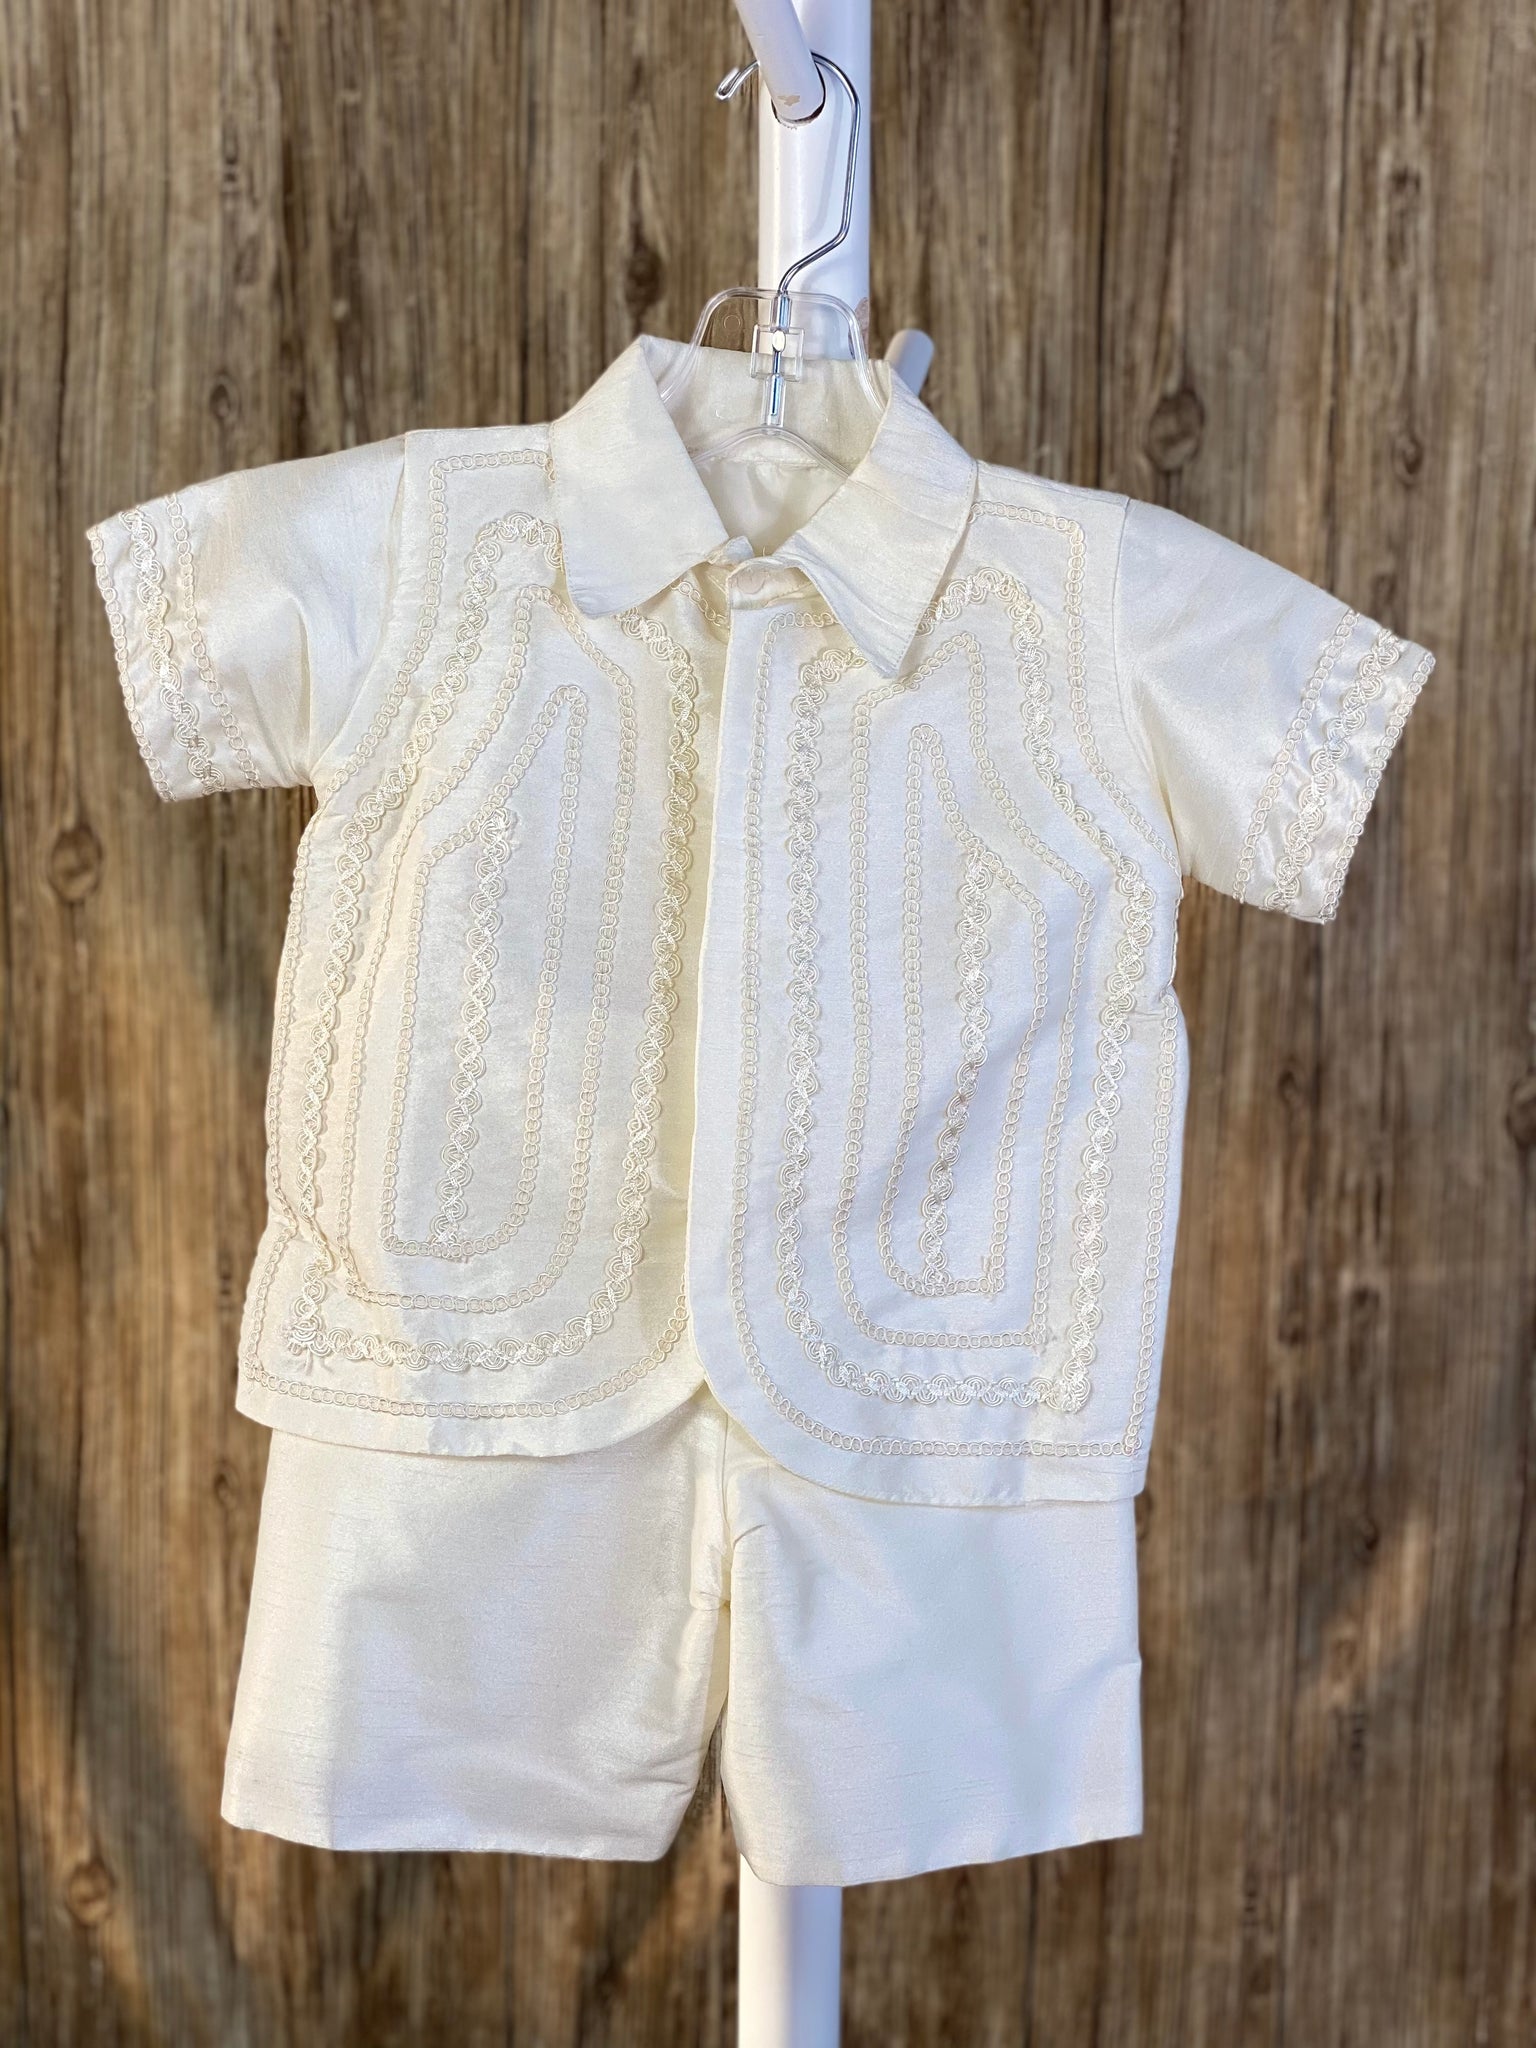 This a beautiful, one-of-a-kind boy’s baptism gown/set.  Lovely clothes for a precious child.  Ivory, size 24M 2- piece set including shirt and suspender pants Collared shirt with short sleeves Simple satin pants Twisted layered trim along shirt cuffs Twisted layered trim on shirt bodice Hidden button closure in front Elastic on the back of pants